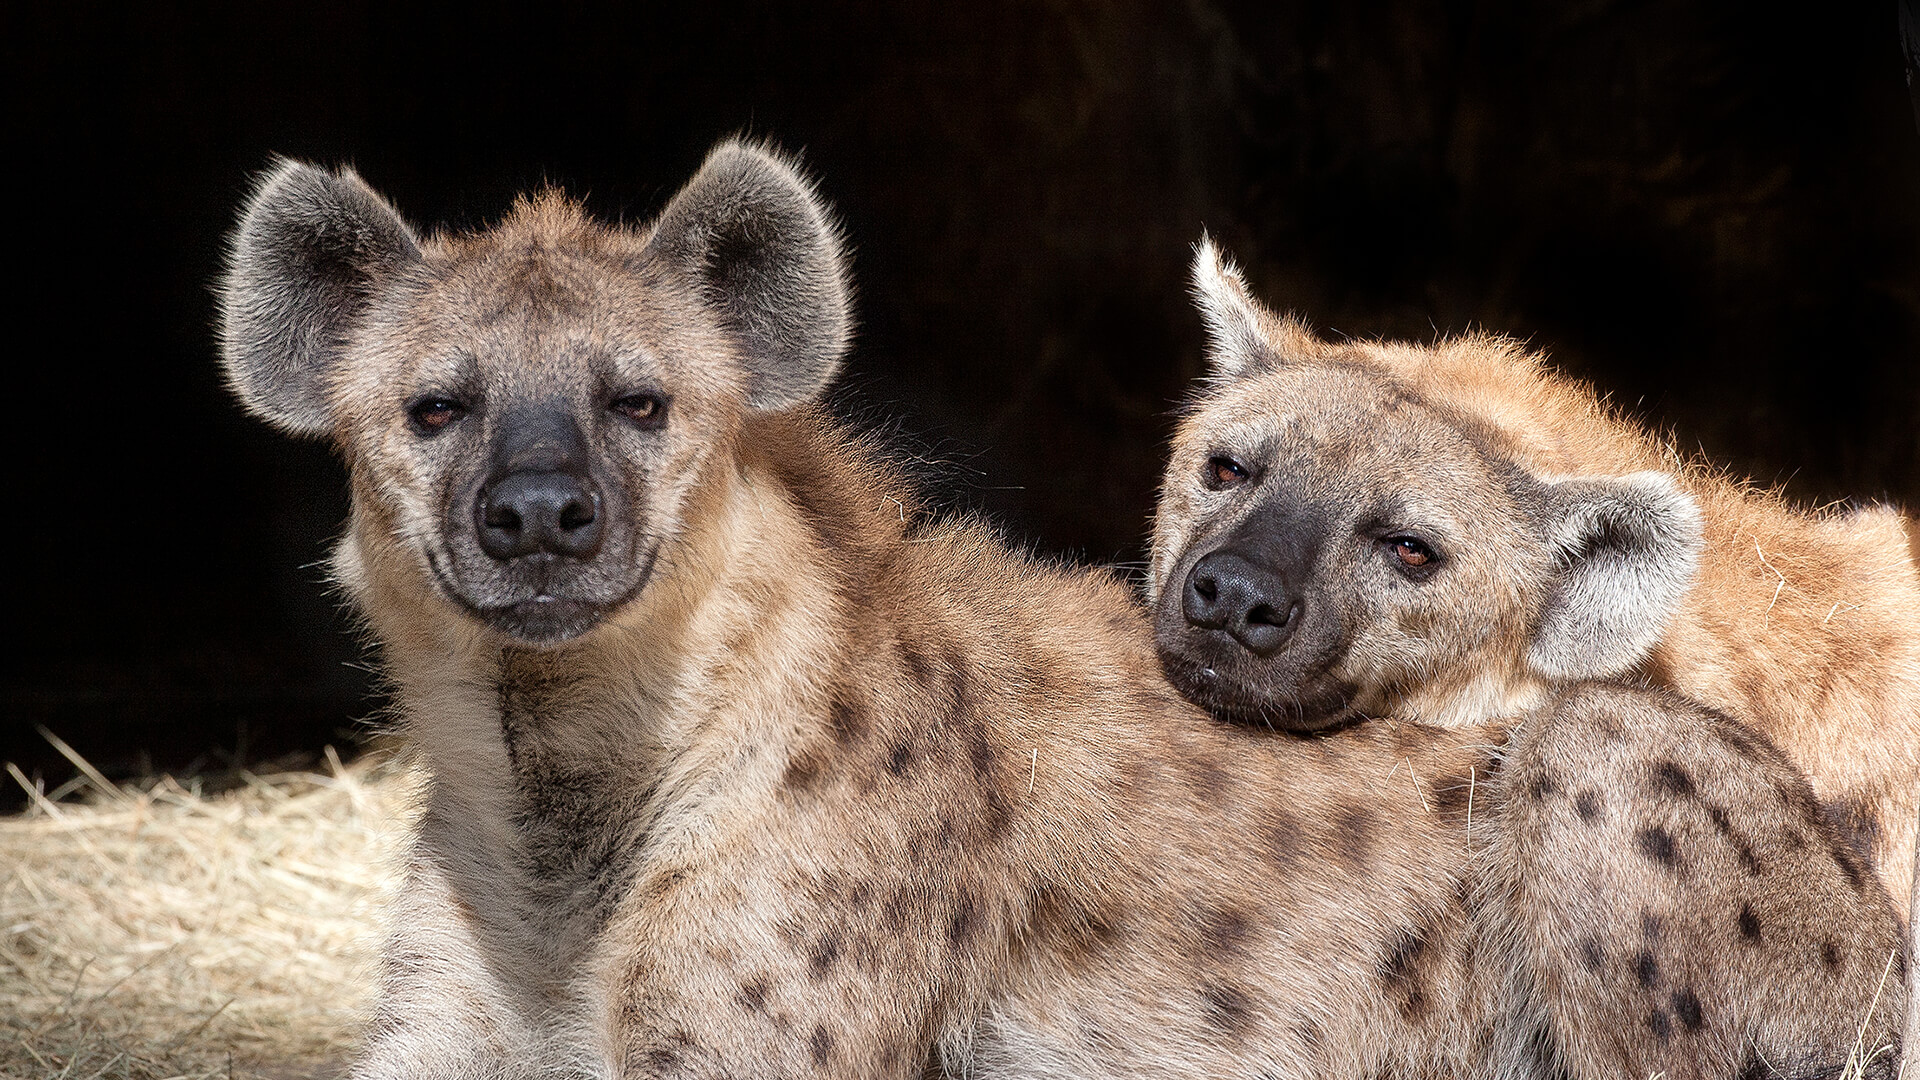 Spotted hyena Turbo rests his head on his brother, Zephyr's, back as they lay in their den.